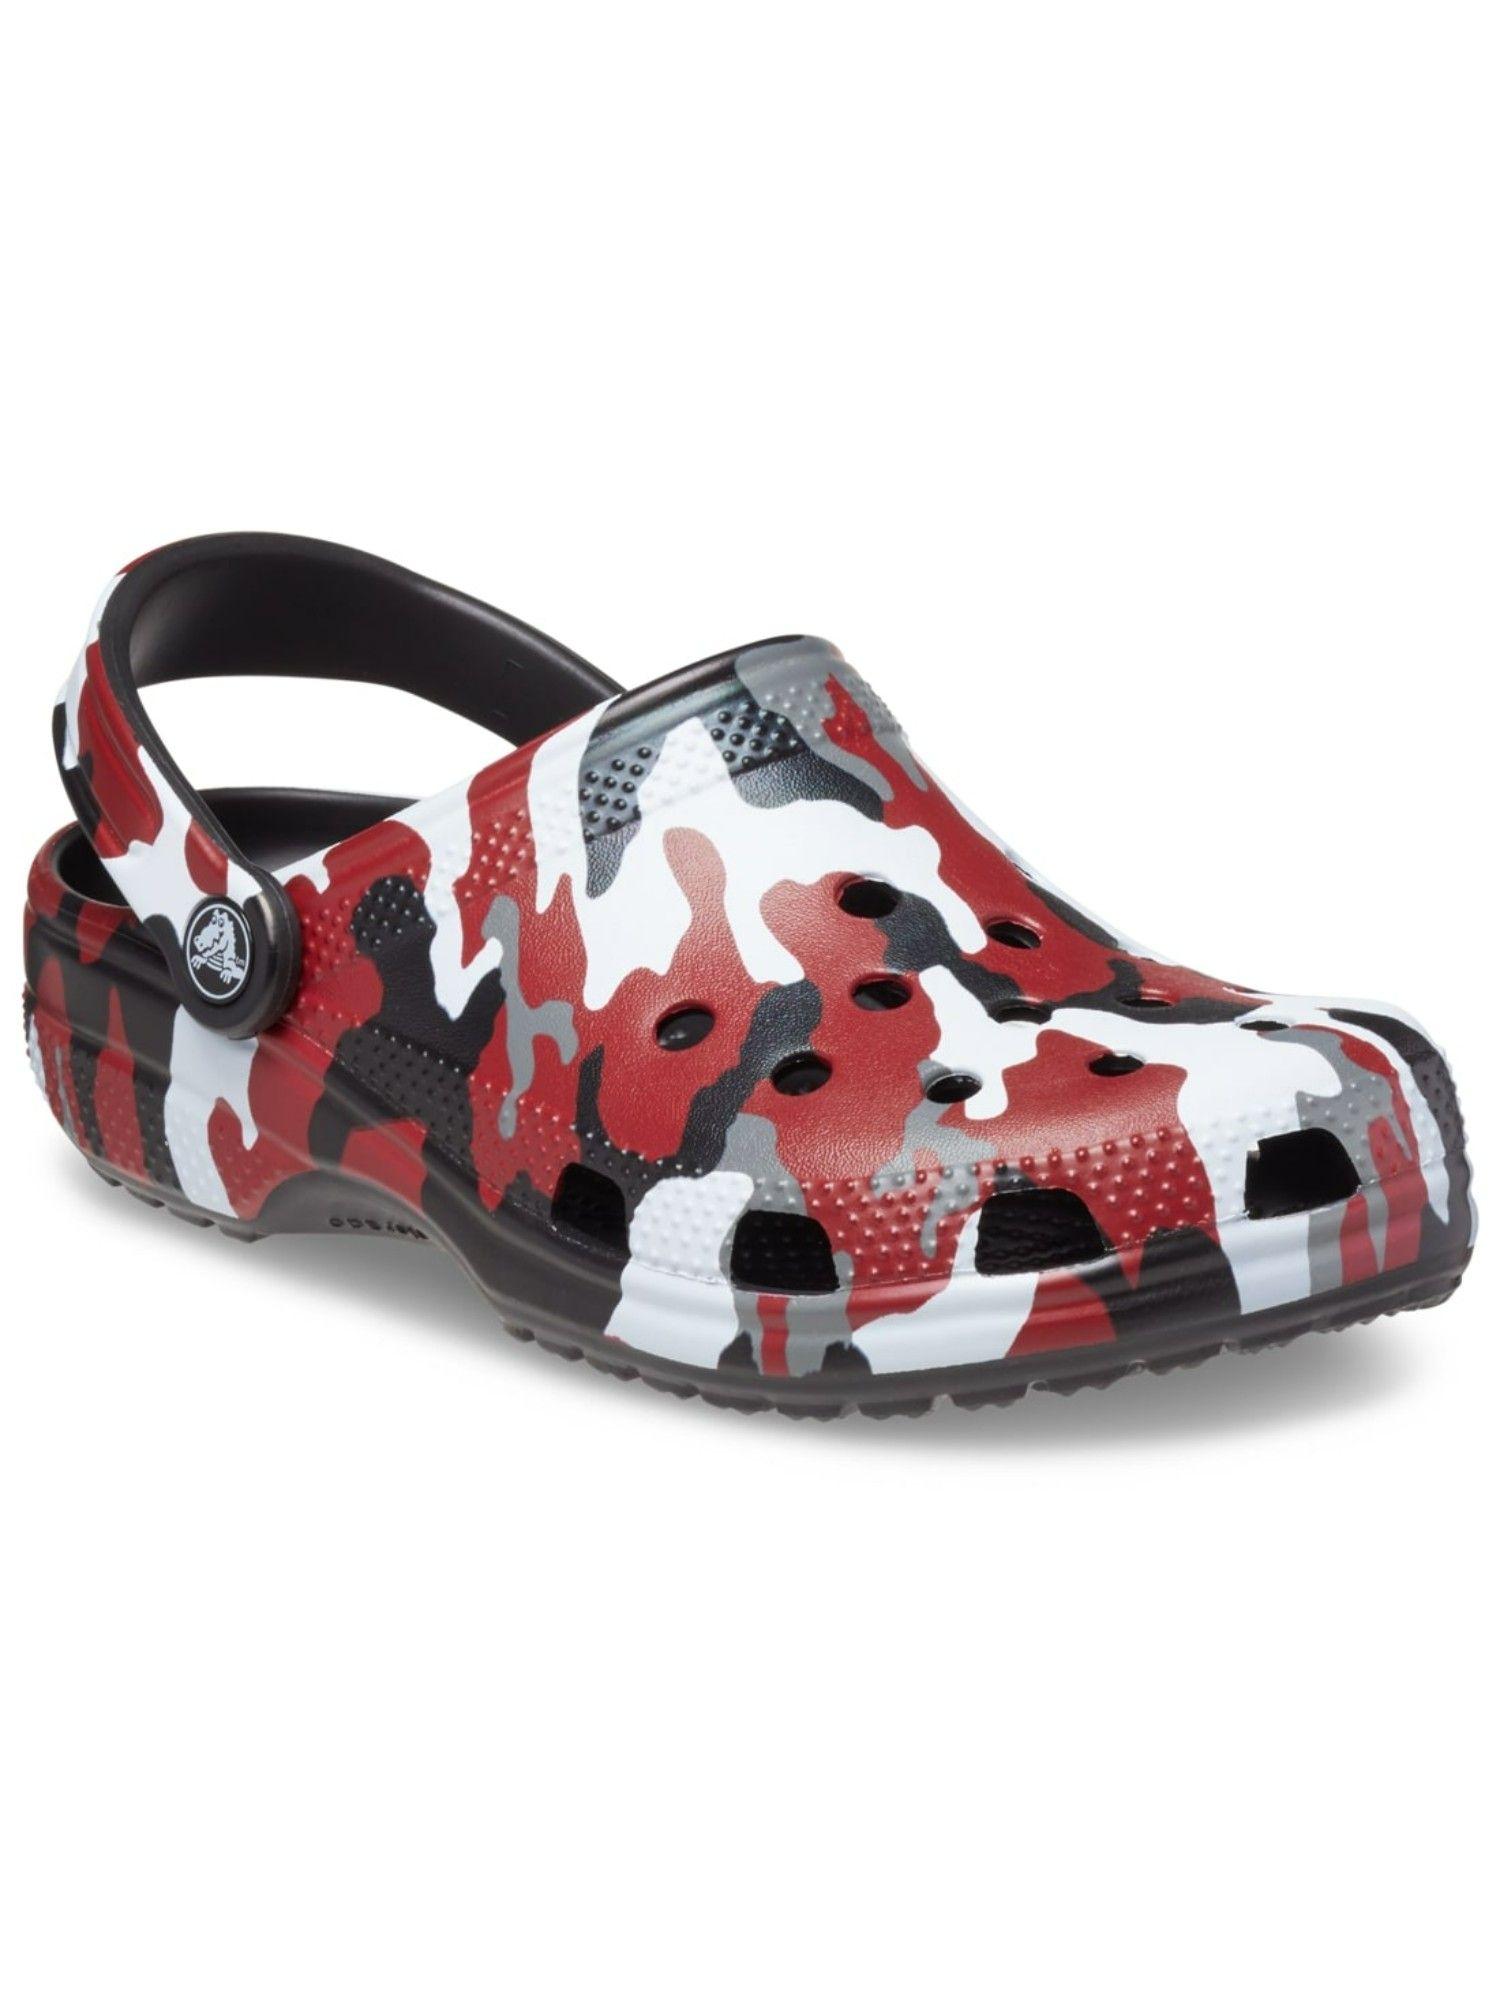 classic-multi-color-unisex-adults-camouflage-clog